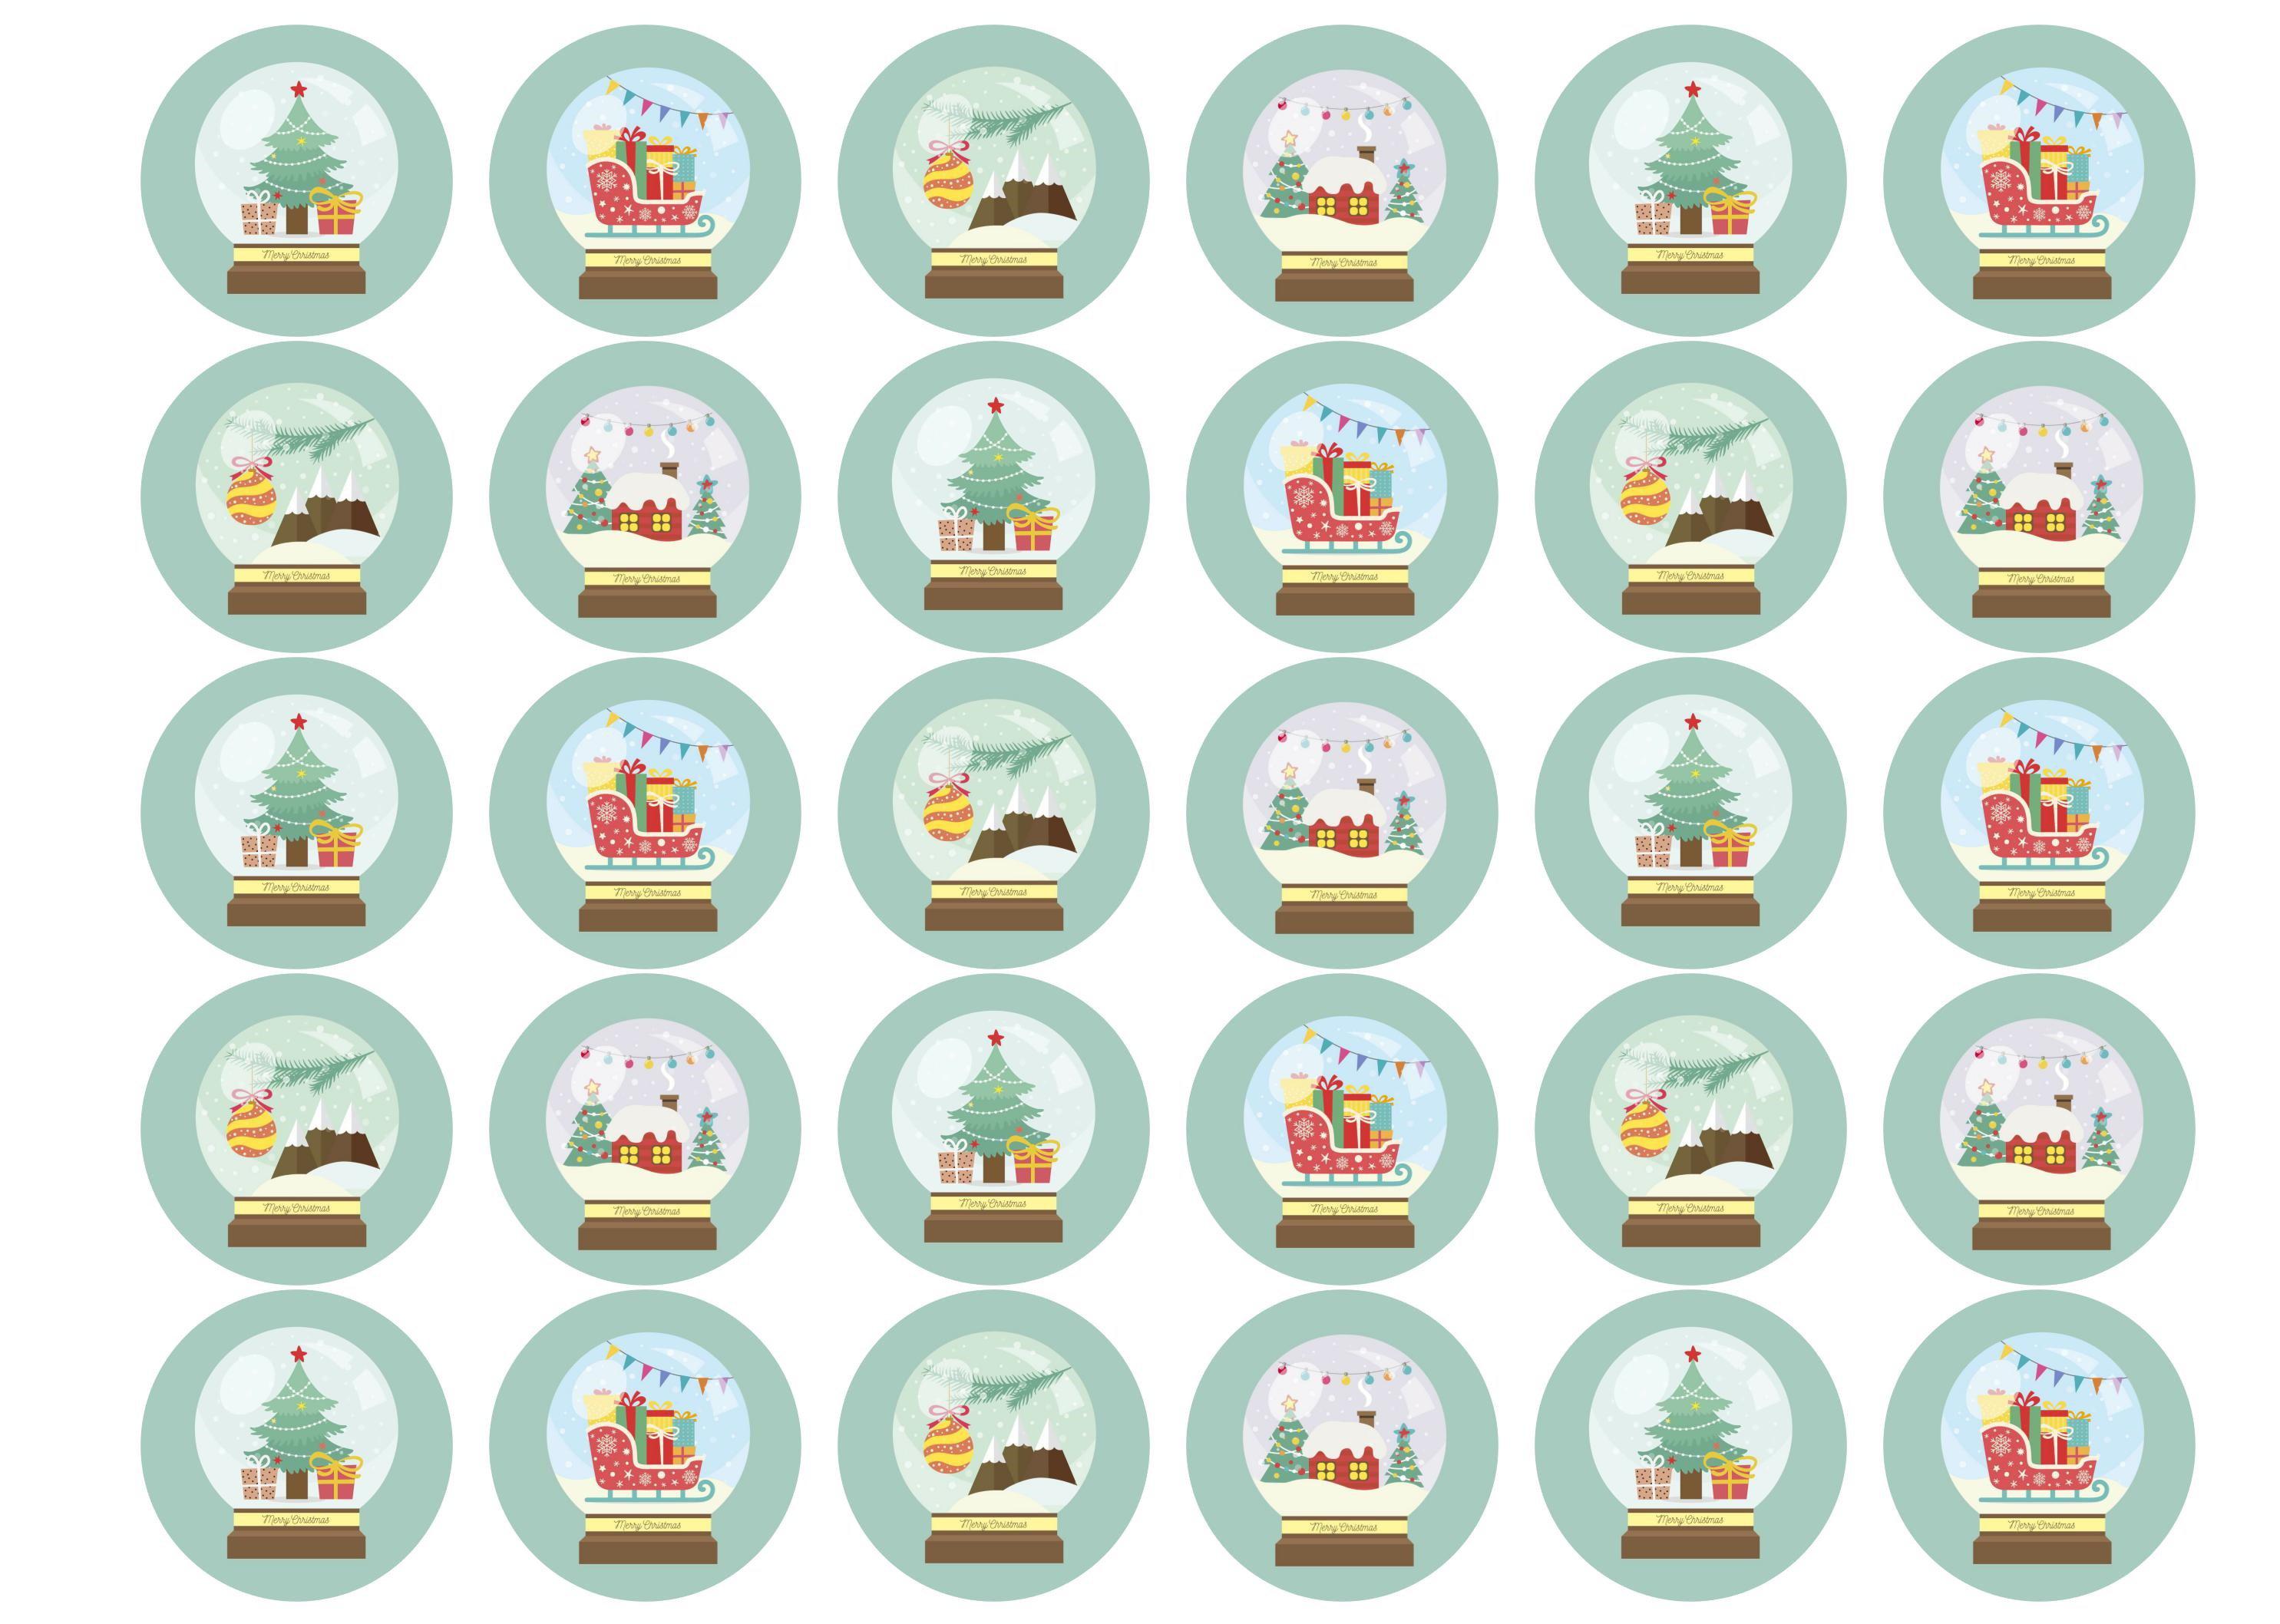 30 edible printed cupcake toppers with Christmas Snow Globe designs